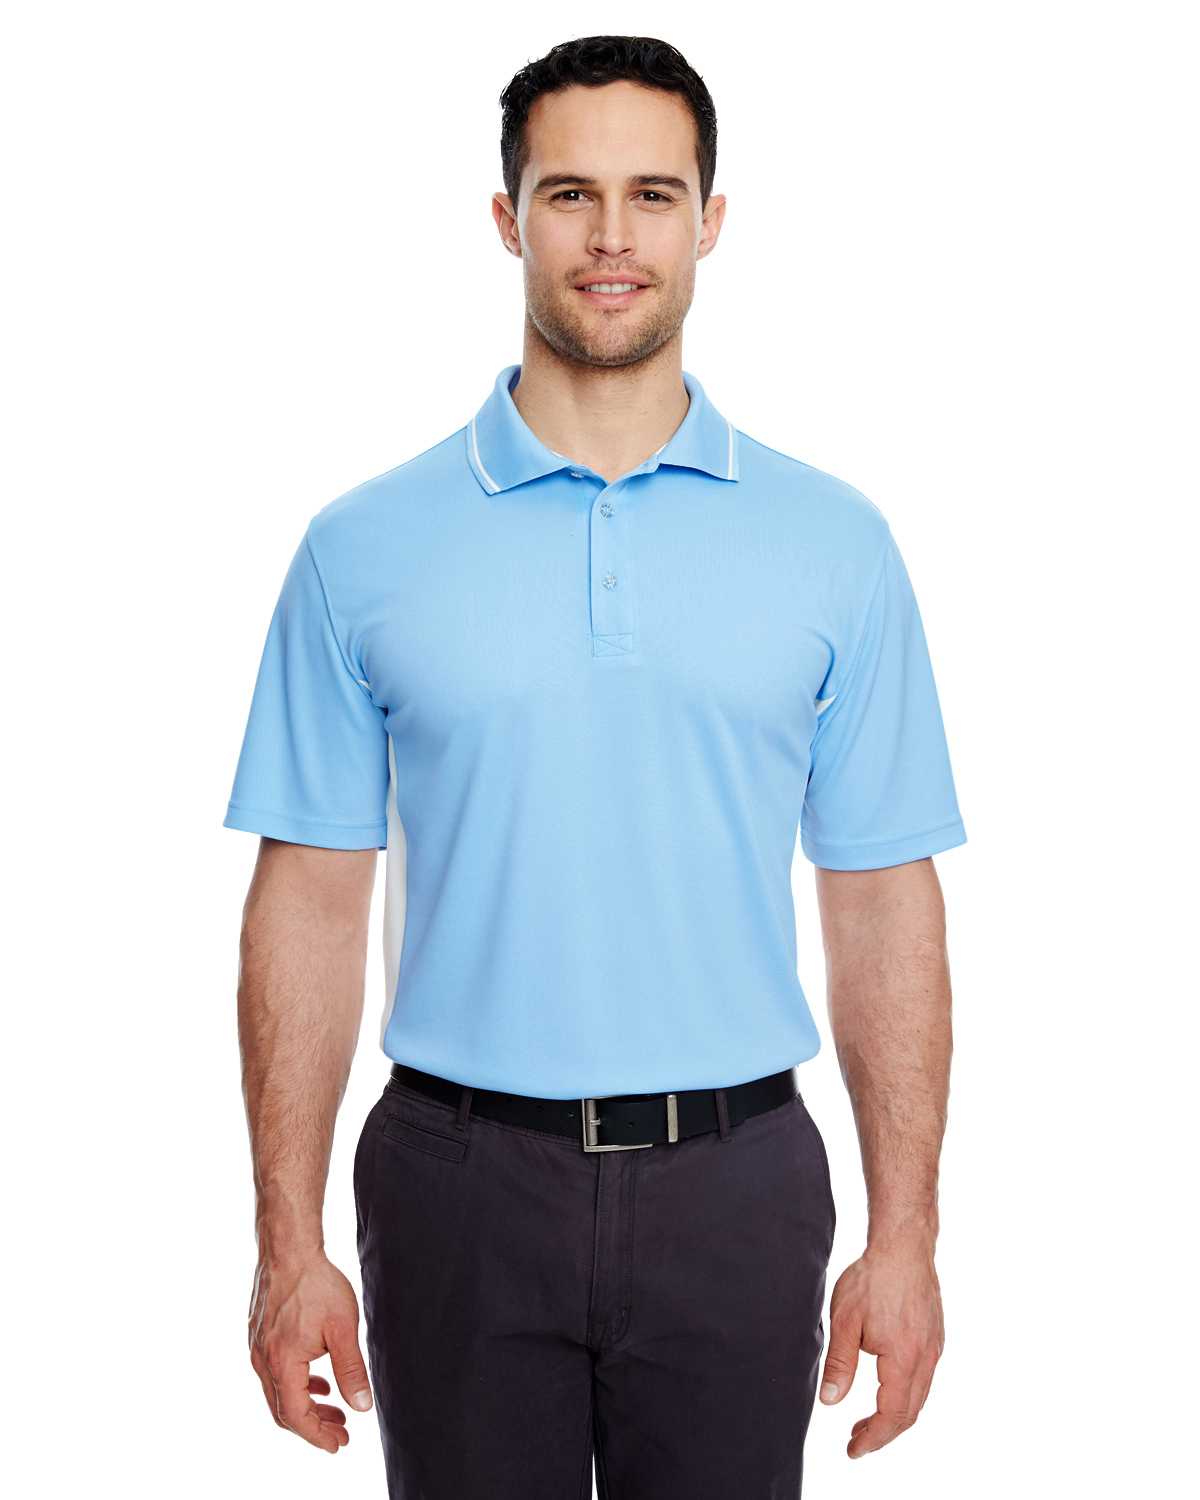 UltraClub 8406 Men's Cool & Dry Sport Two-Tone Polo | ApparelChoice.com